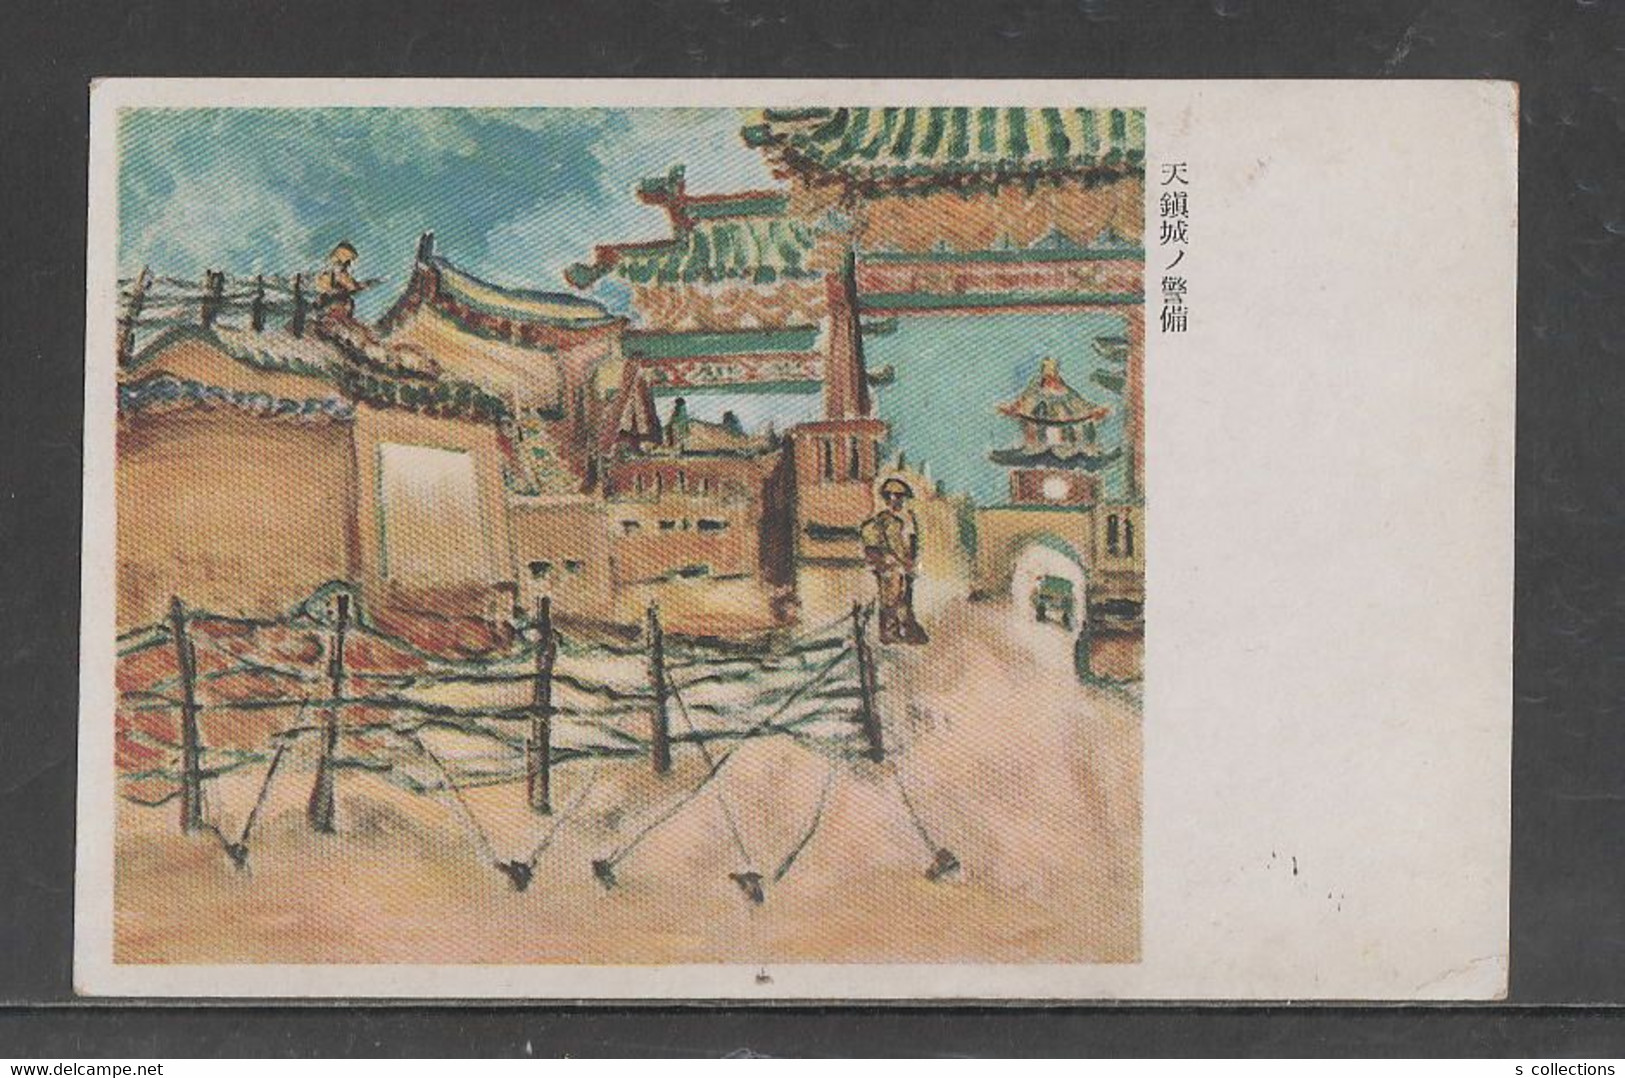 JAPAN WWII Military Tianzhen Castle Picture Postcard NORTH CHINA WW2 MANCHURIA CHINE MANDCHOUKOUO JAPON GIAPPONE - 1941-45 Chine Du Nord